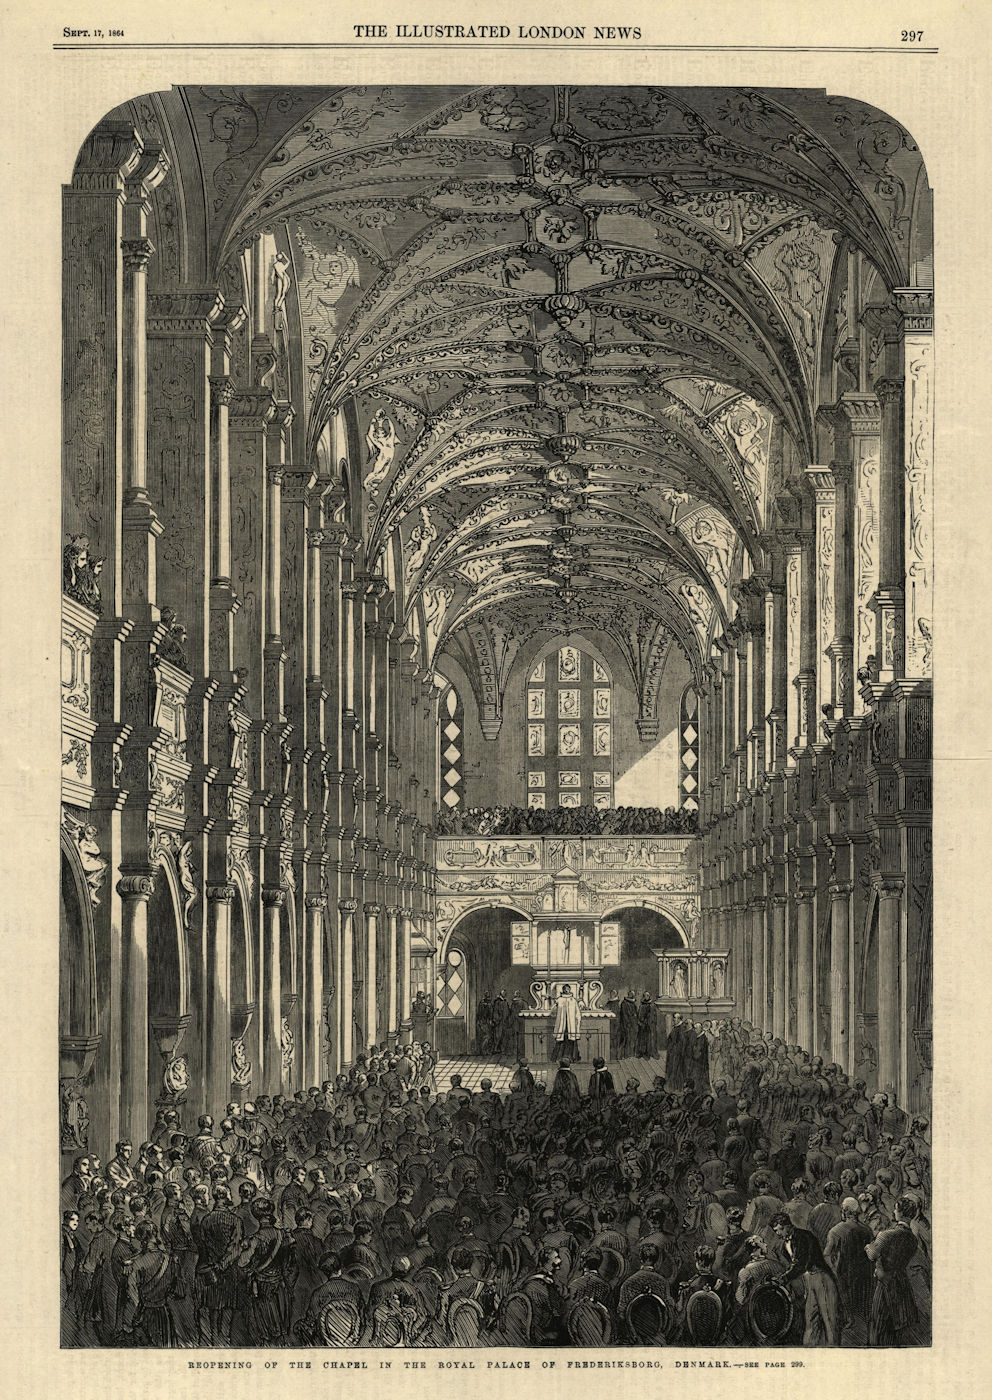 Reopening of the Chapel in the royal palace of Frederiksborg, Denmark 1864